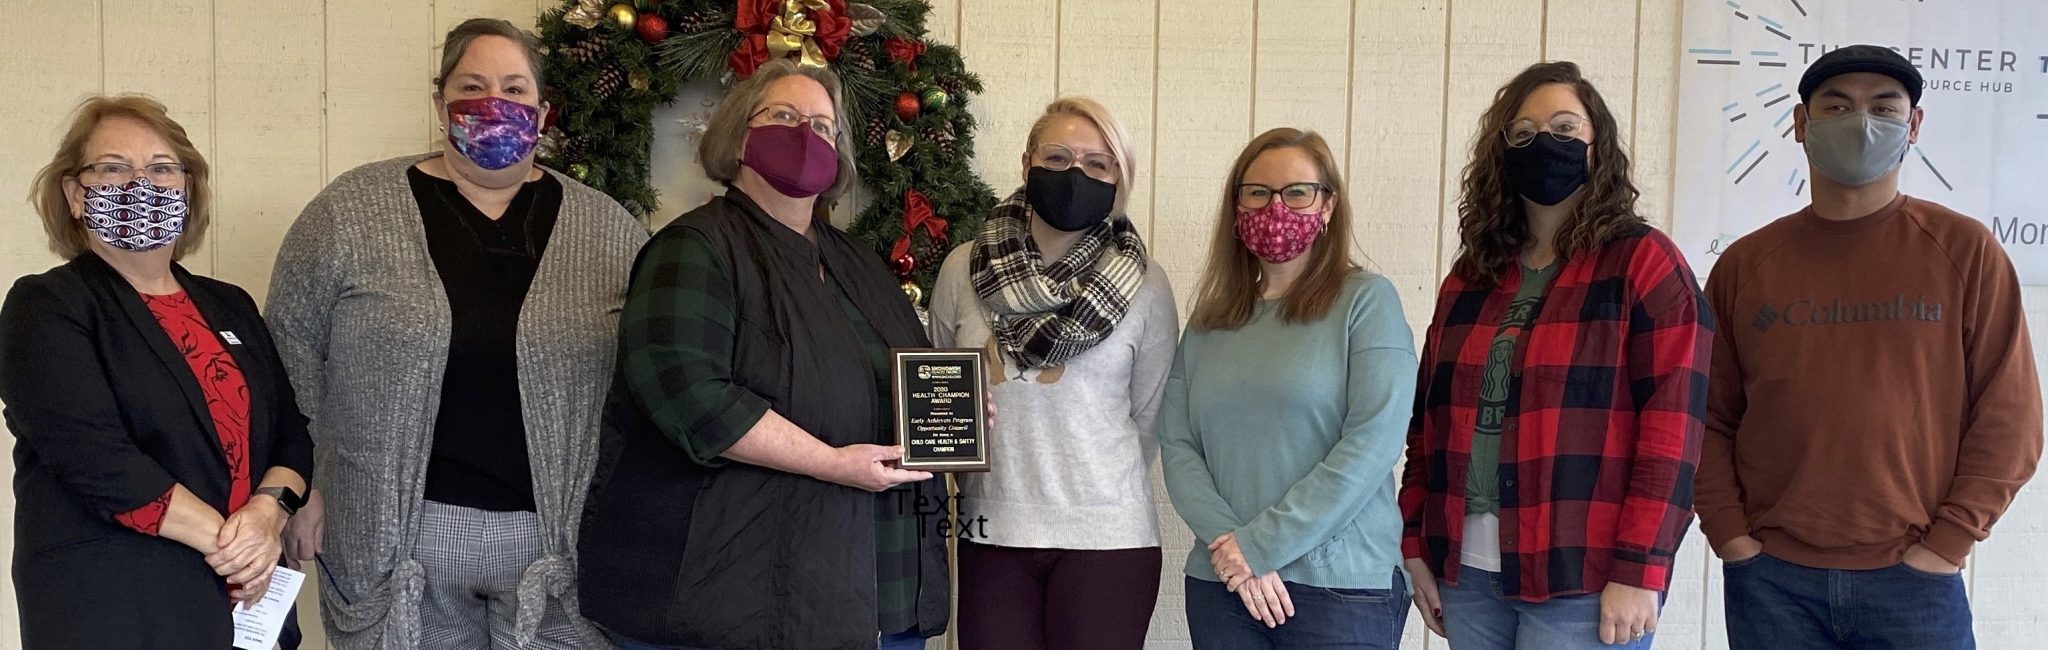 Masked staff from CCA NW WA stand up to receive award, center person holds plaque